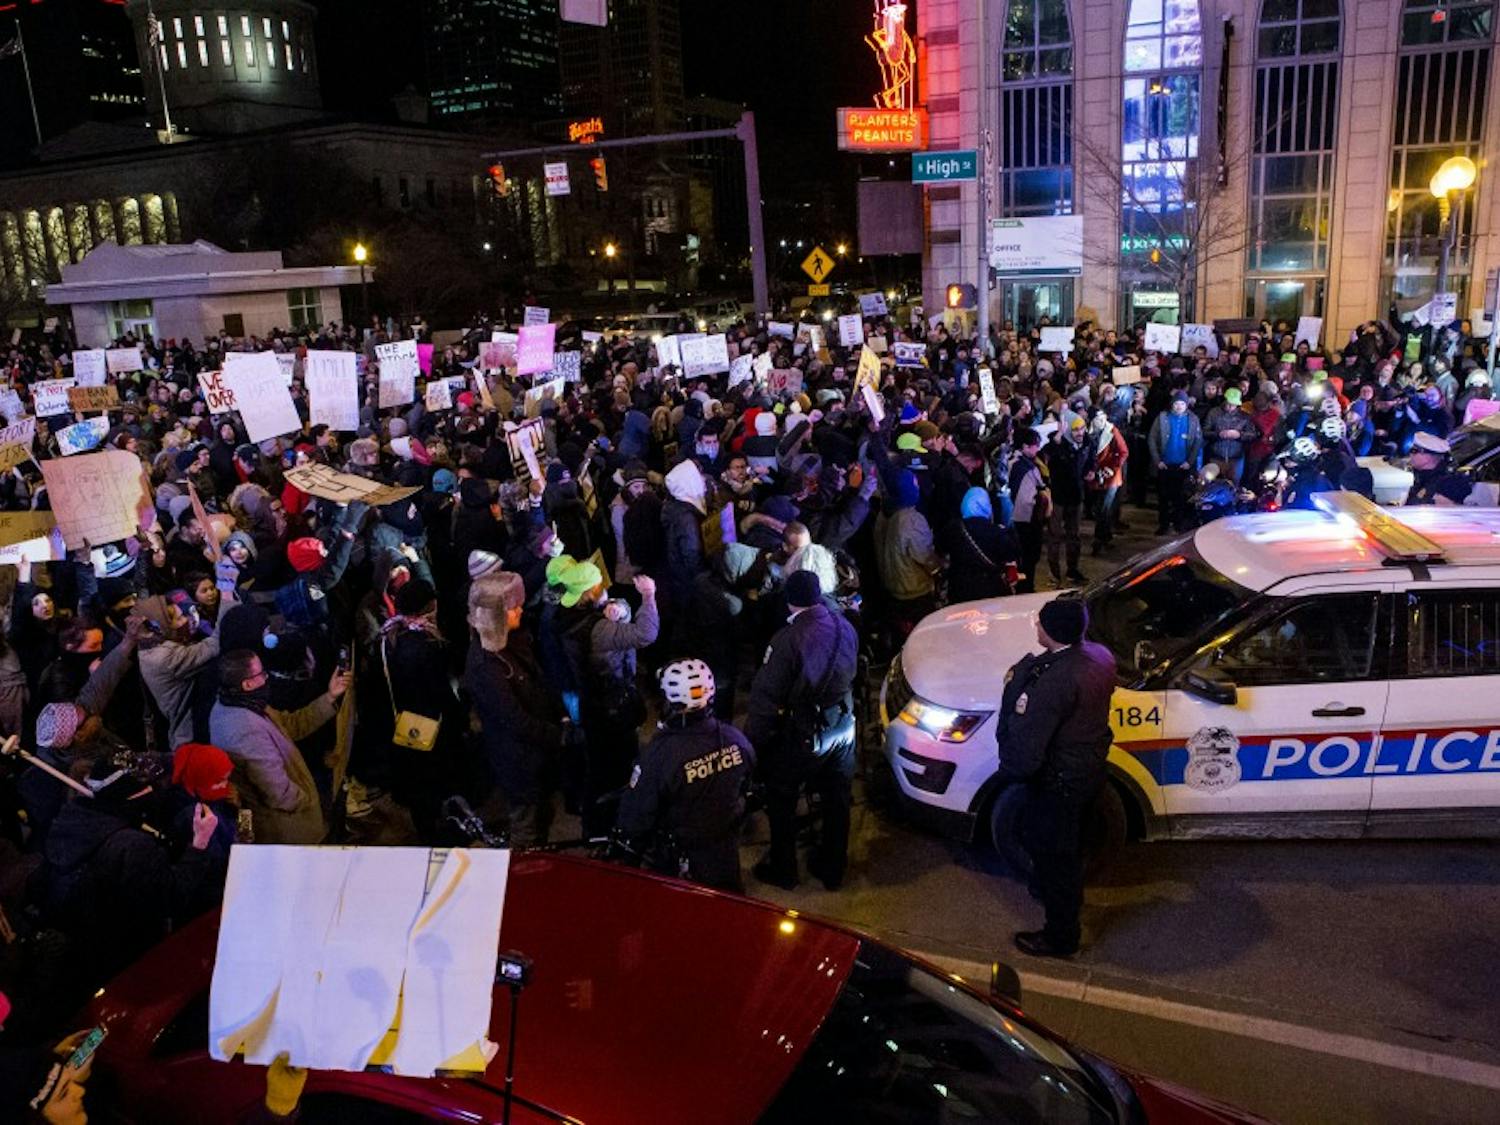 Police stand by while protesters block the intersection of South High and State streets in Columbus&nbsp;during a Resist Trump Rally in Columbus on Monday, Jan. 30, 2017.